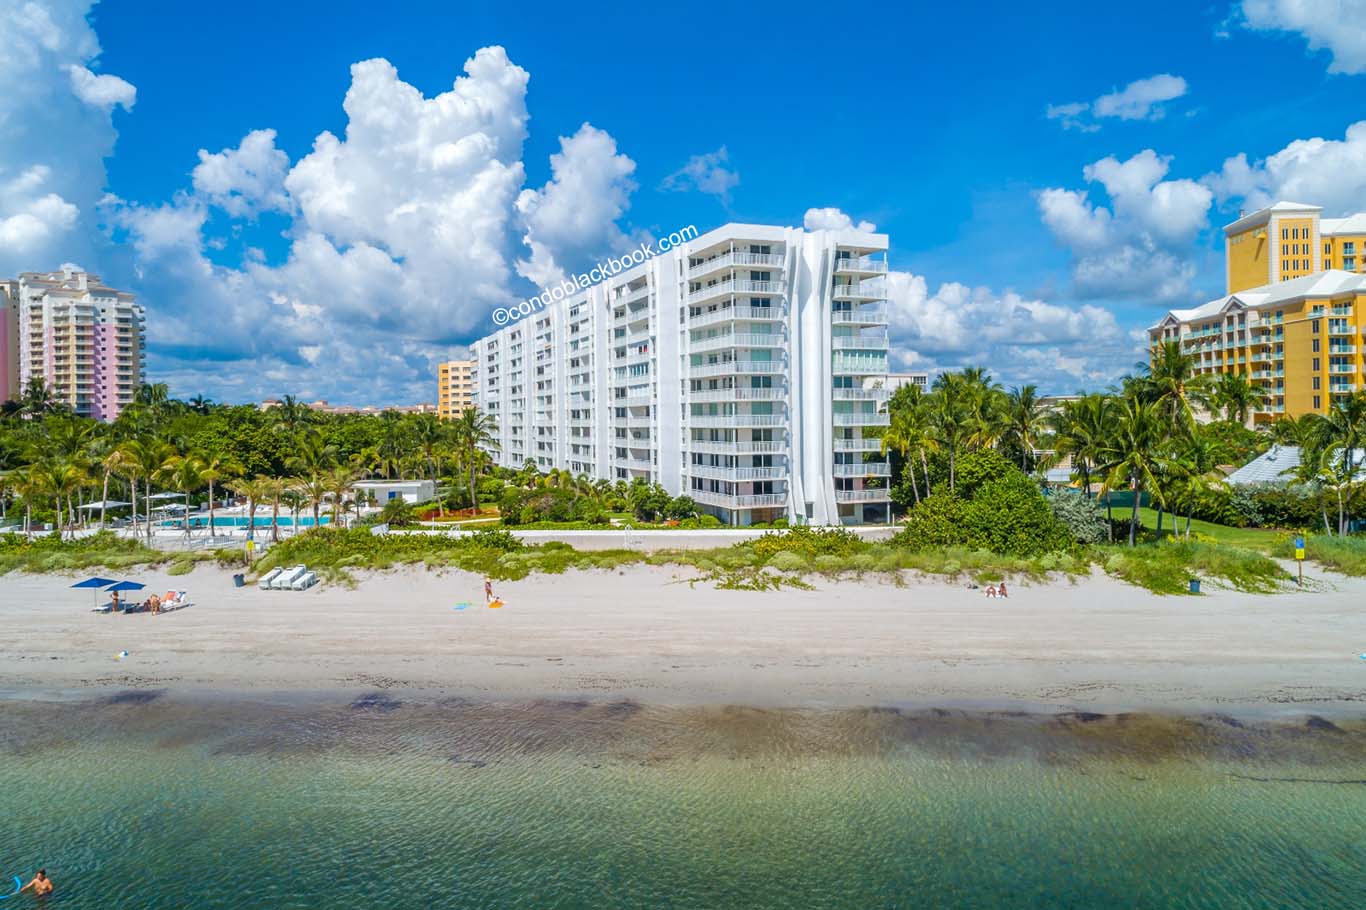 Sands of Key Biscayne Condos for Sale and Rent in Key Biscayne